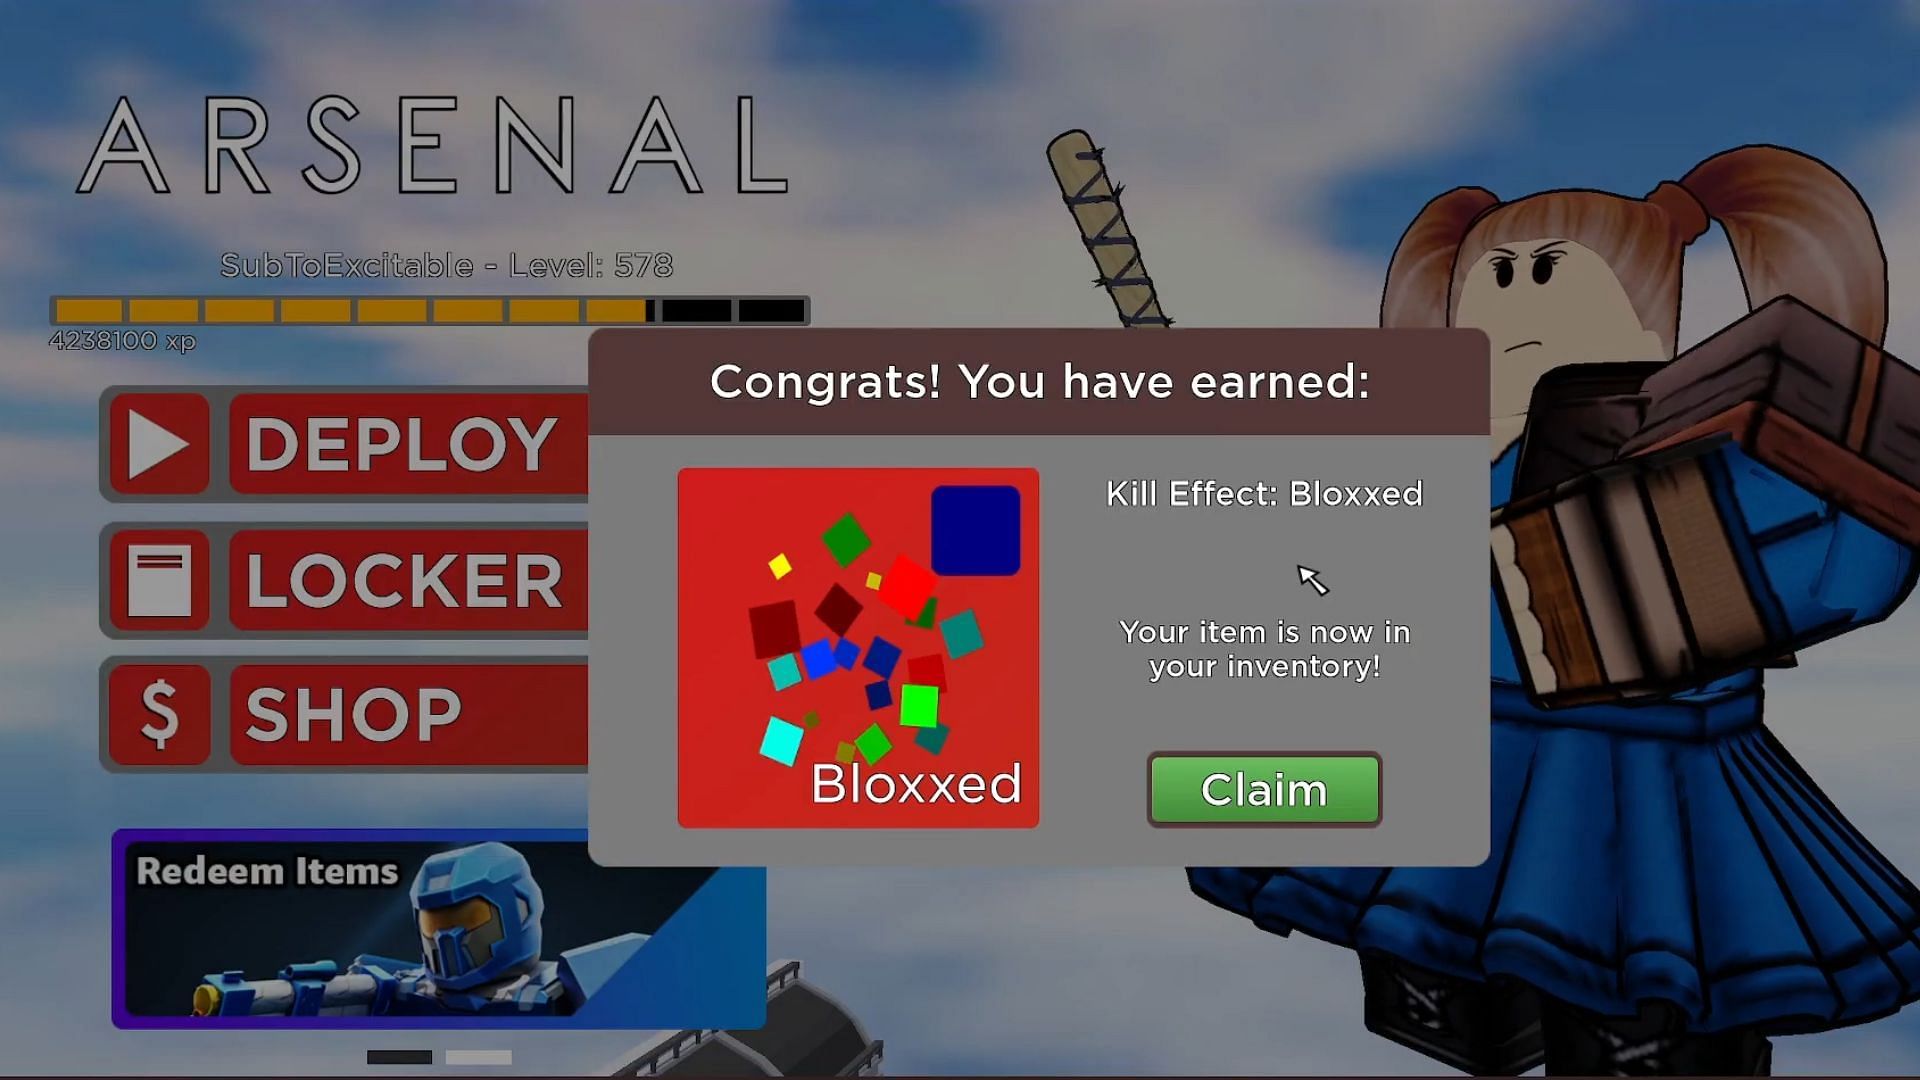 You earn two rewards for completing the Arsenal event (Image via YouTube/Excitable)